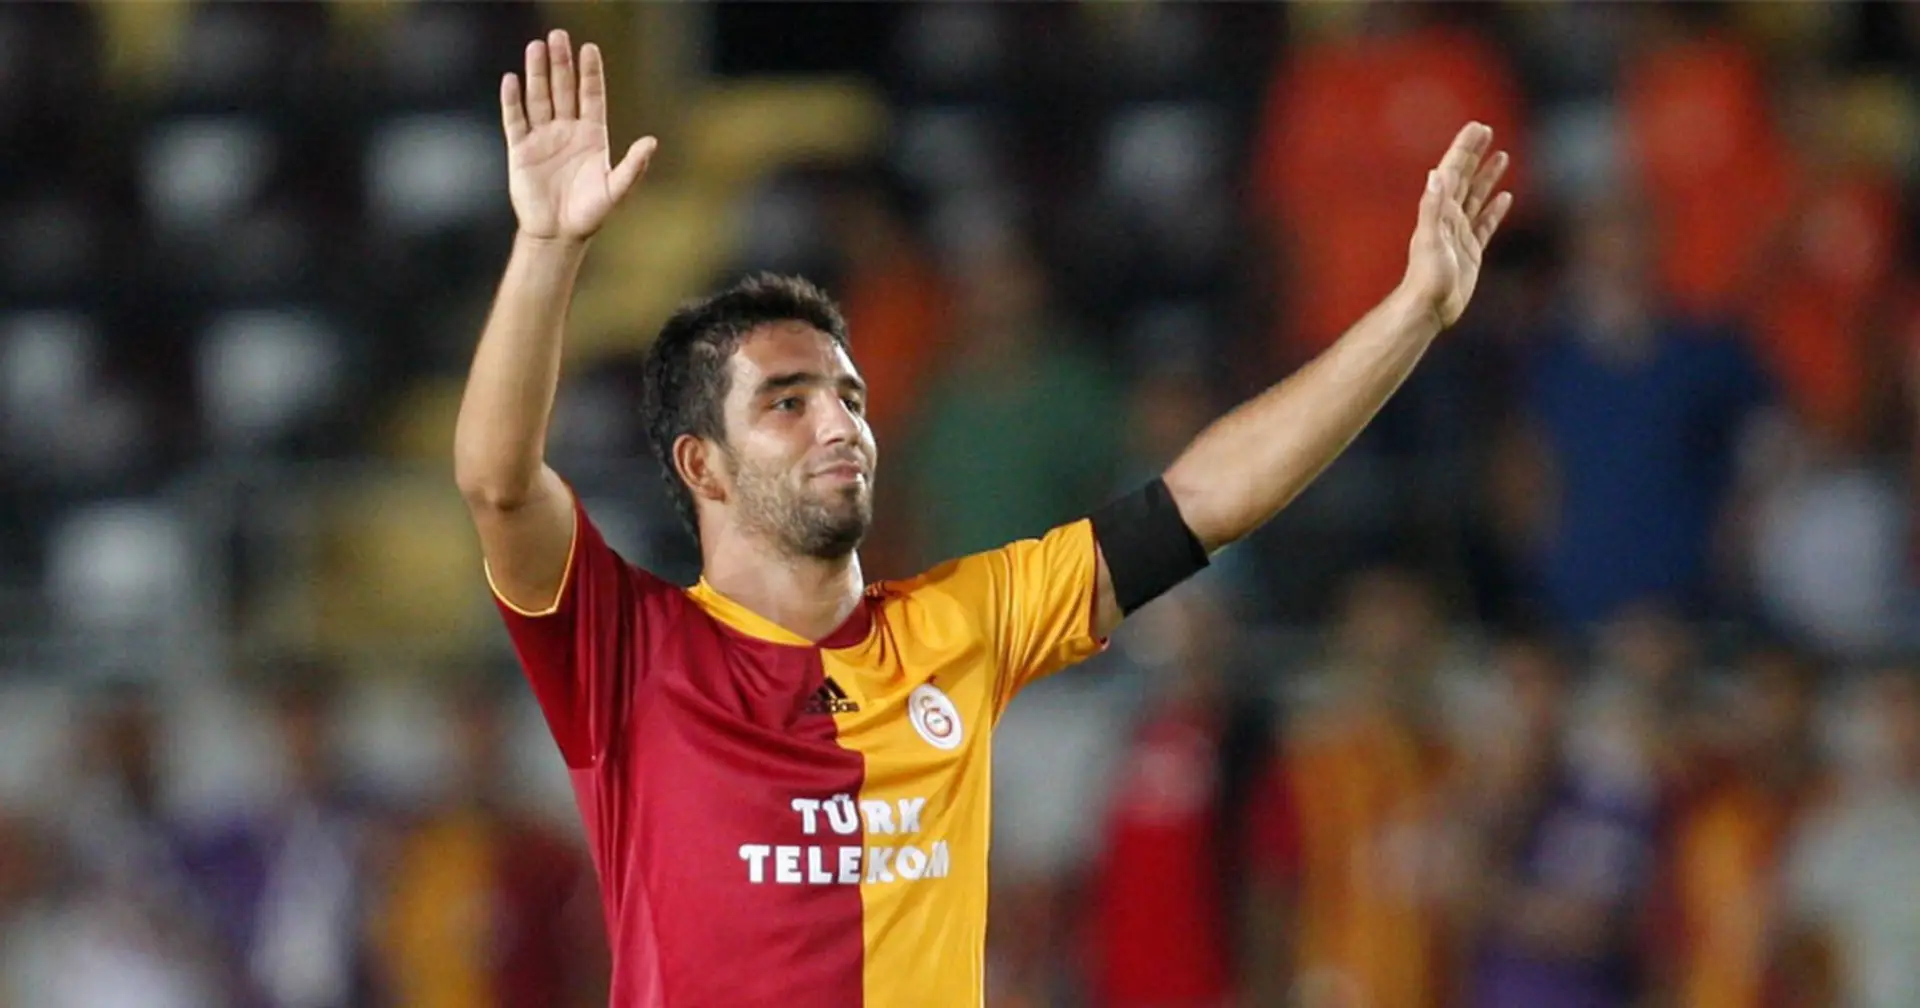 Now it's official: Arda Turan signs for Galatasaray after spending 5 years at Barcelona